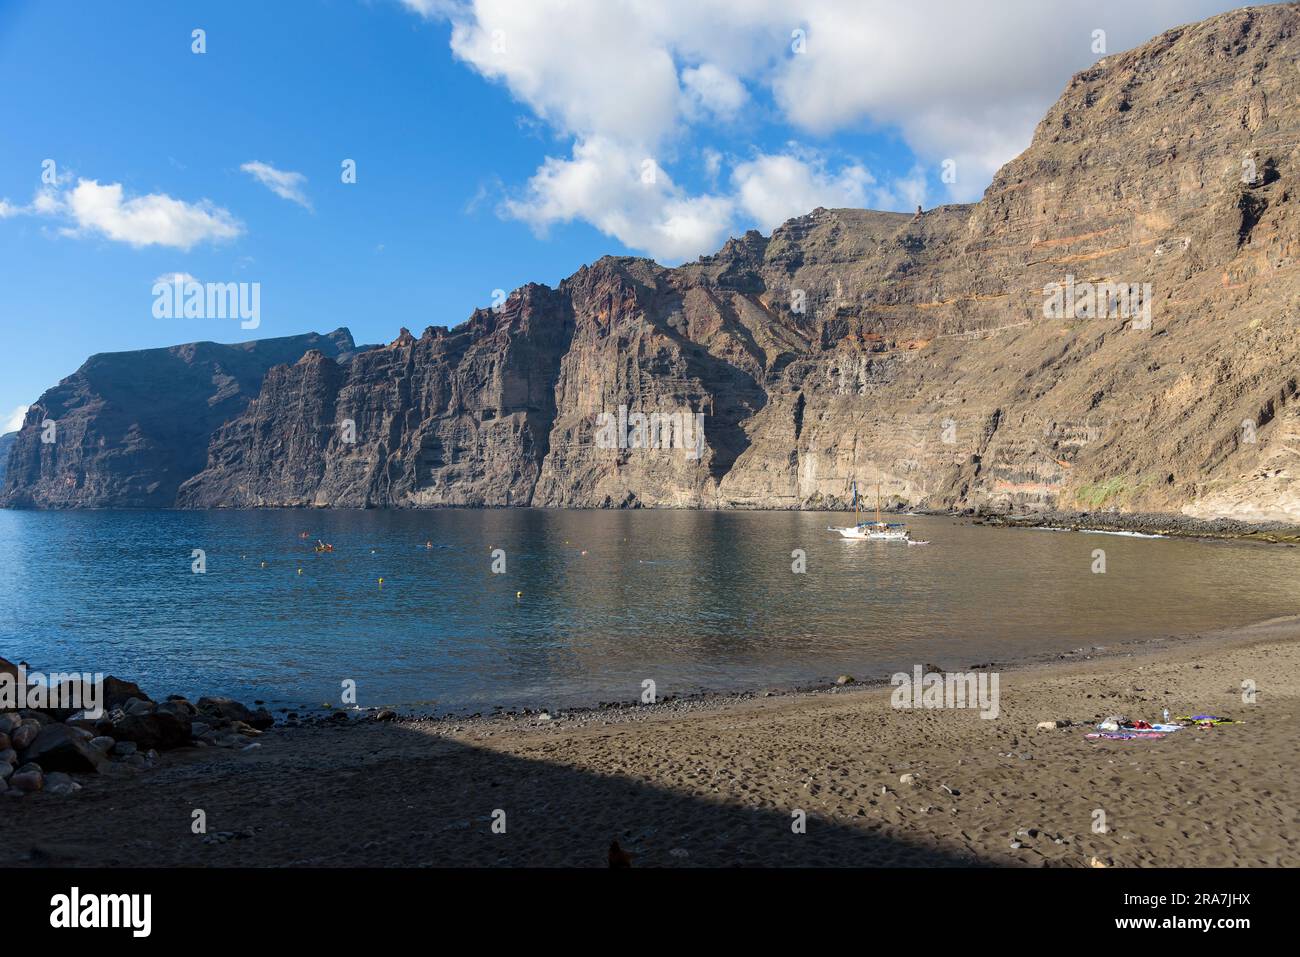 View of massive cliffs of Los Gigantes on the western coast of Tenerife from Los Guios beach. Canary Islands, Spain Stock Photo